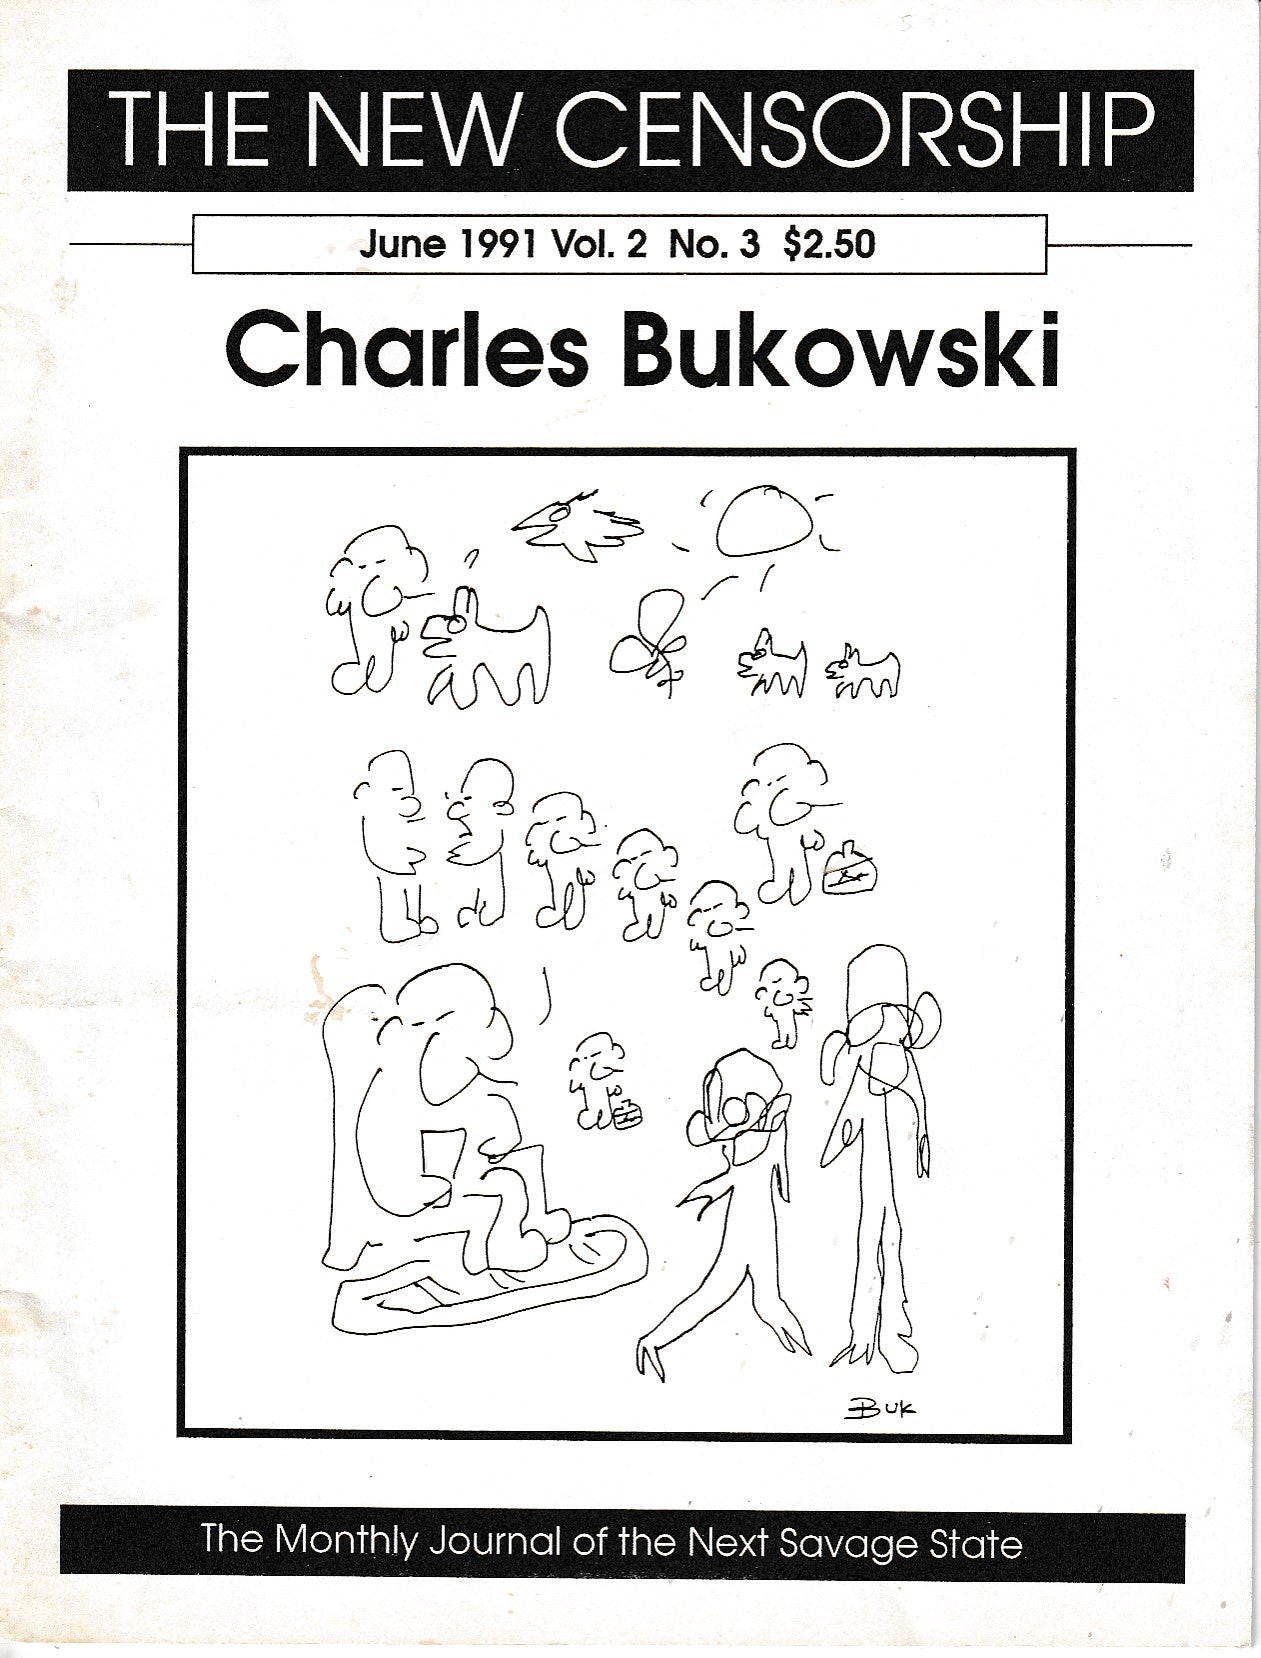 The New Censorship June 1991: Two Uncollected, Six First Appearance Poems (9 Total), Entire Issue Devoted to Drawings & Poems by Charles Bukowski